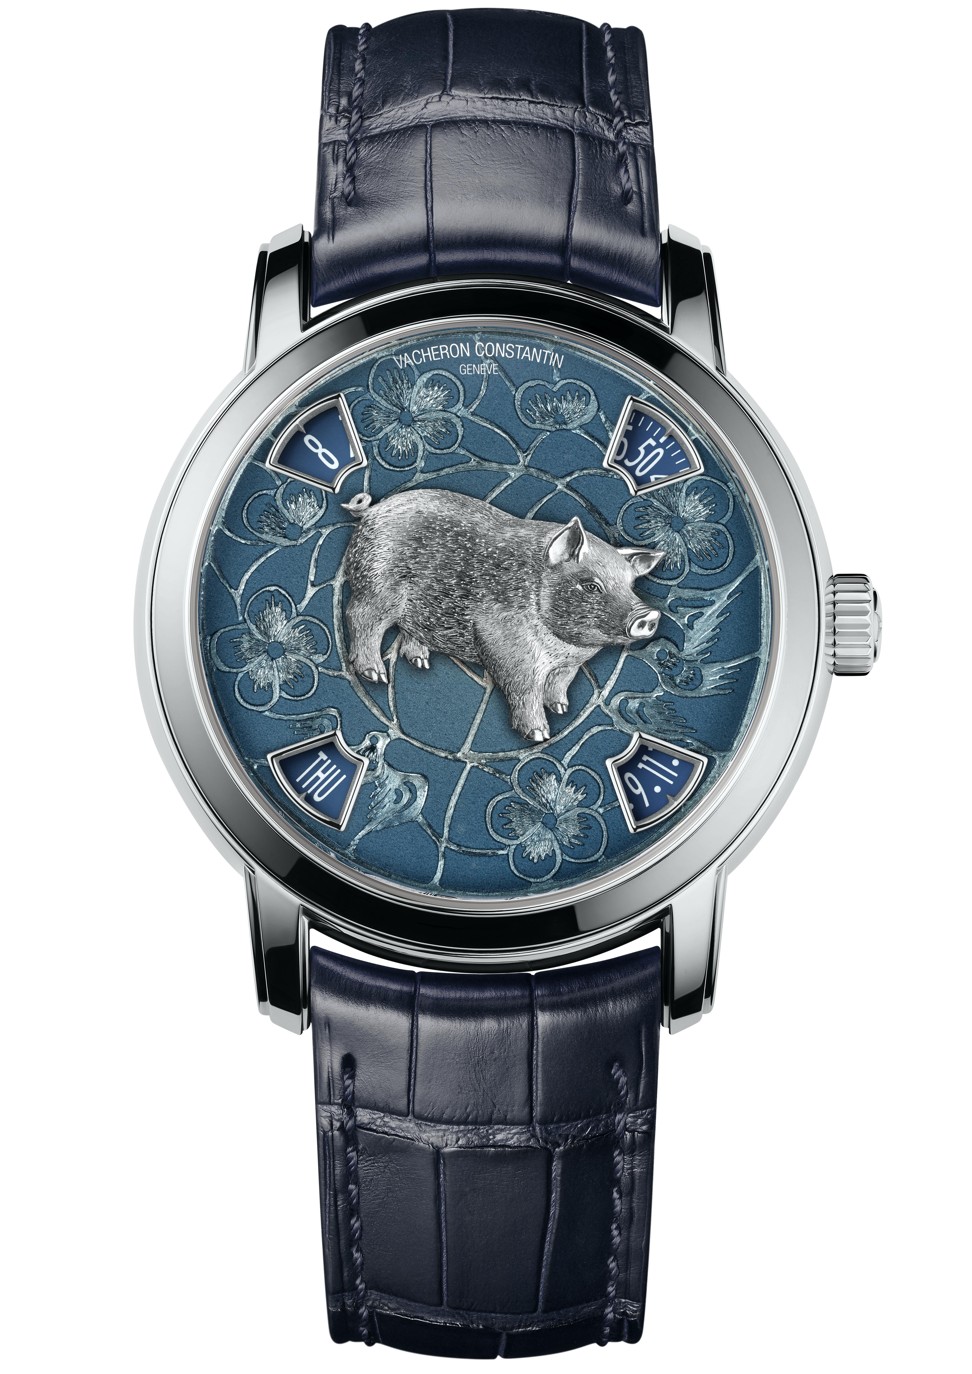 Vacheron Constantin’s platinum limited-edition Metiers d’Art The Legend of the Chinese zodiac: Year of the Pig timepiece, which shows the date and time without moving hands.